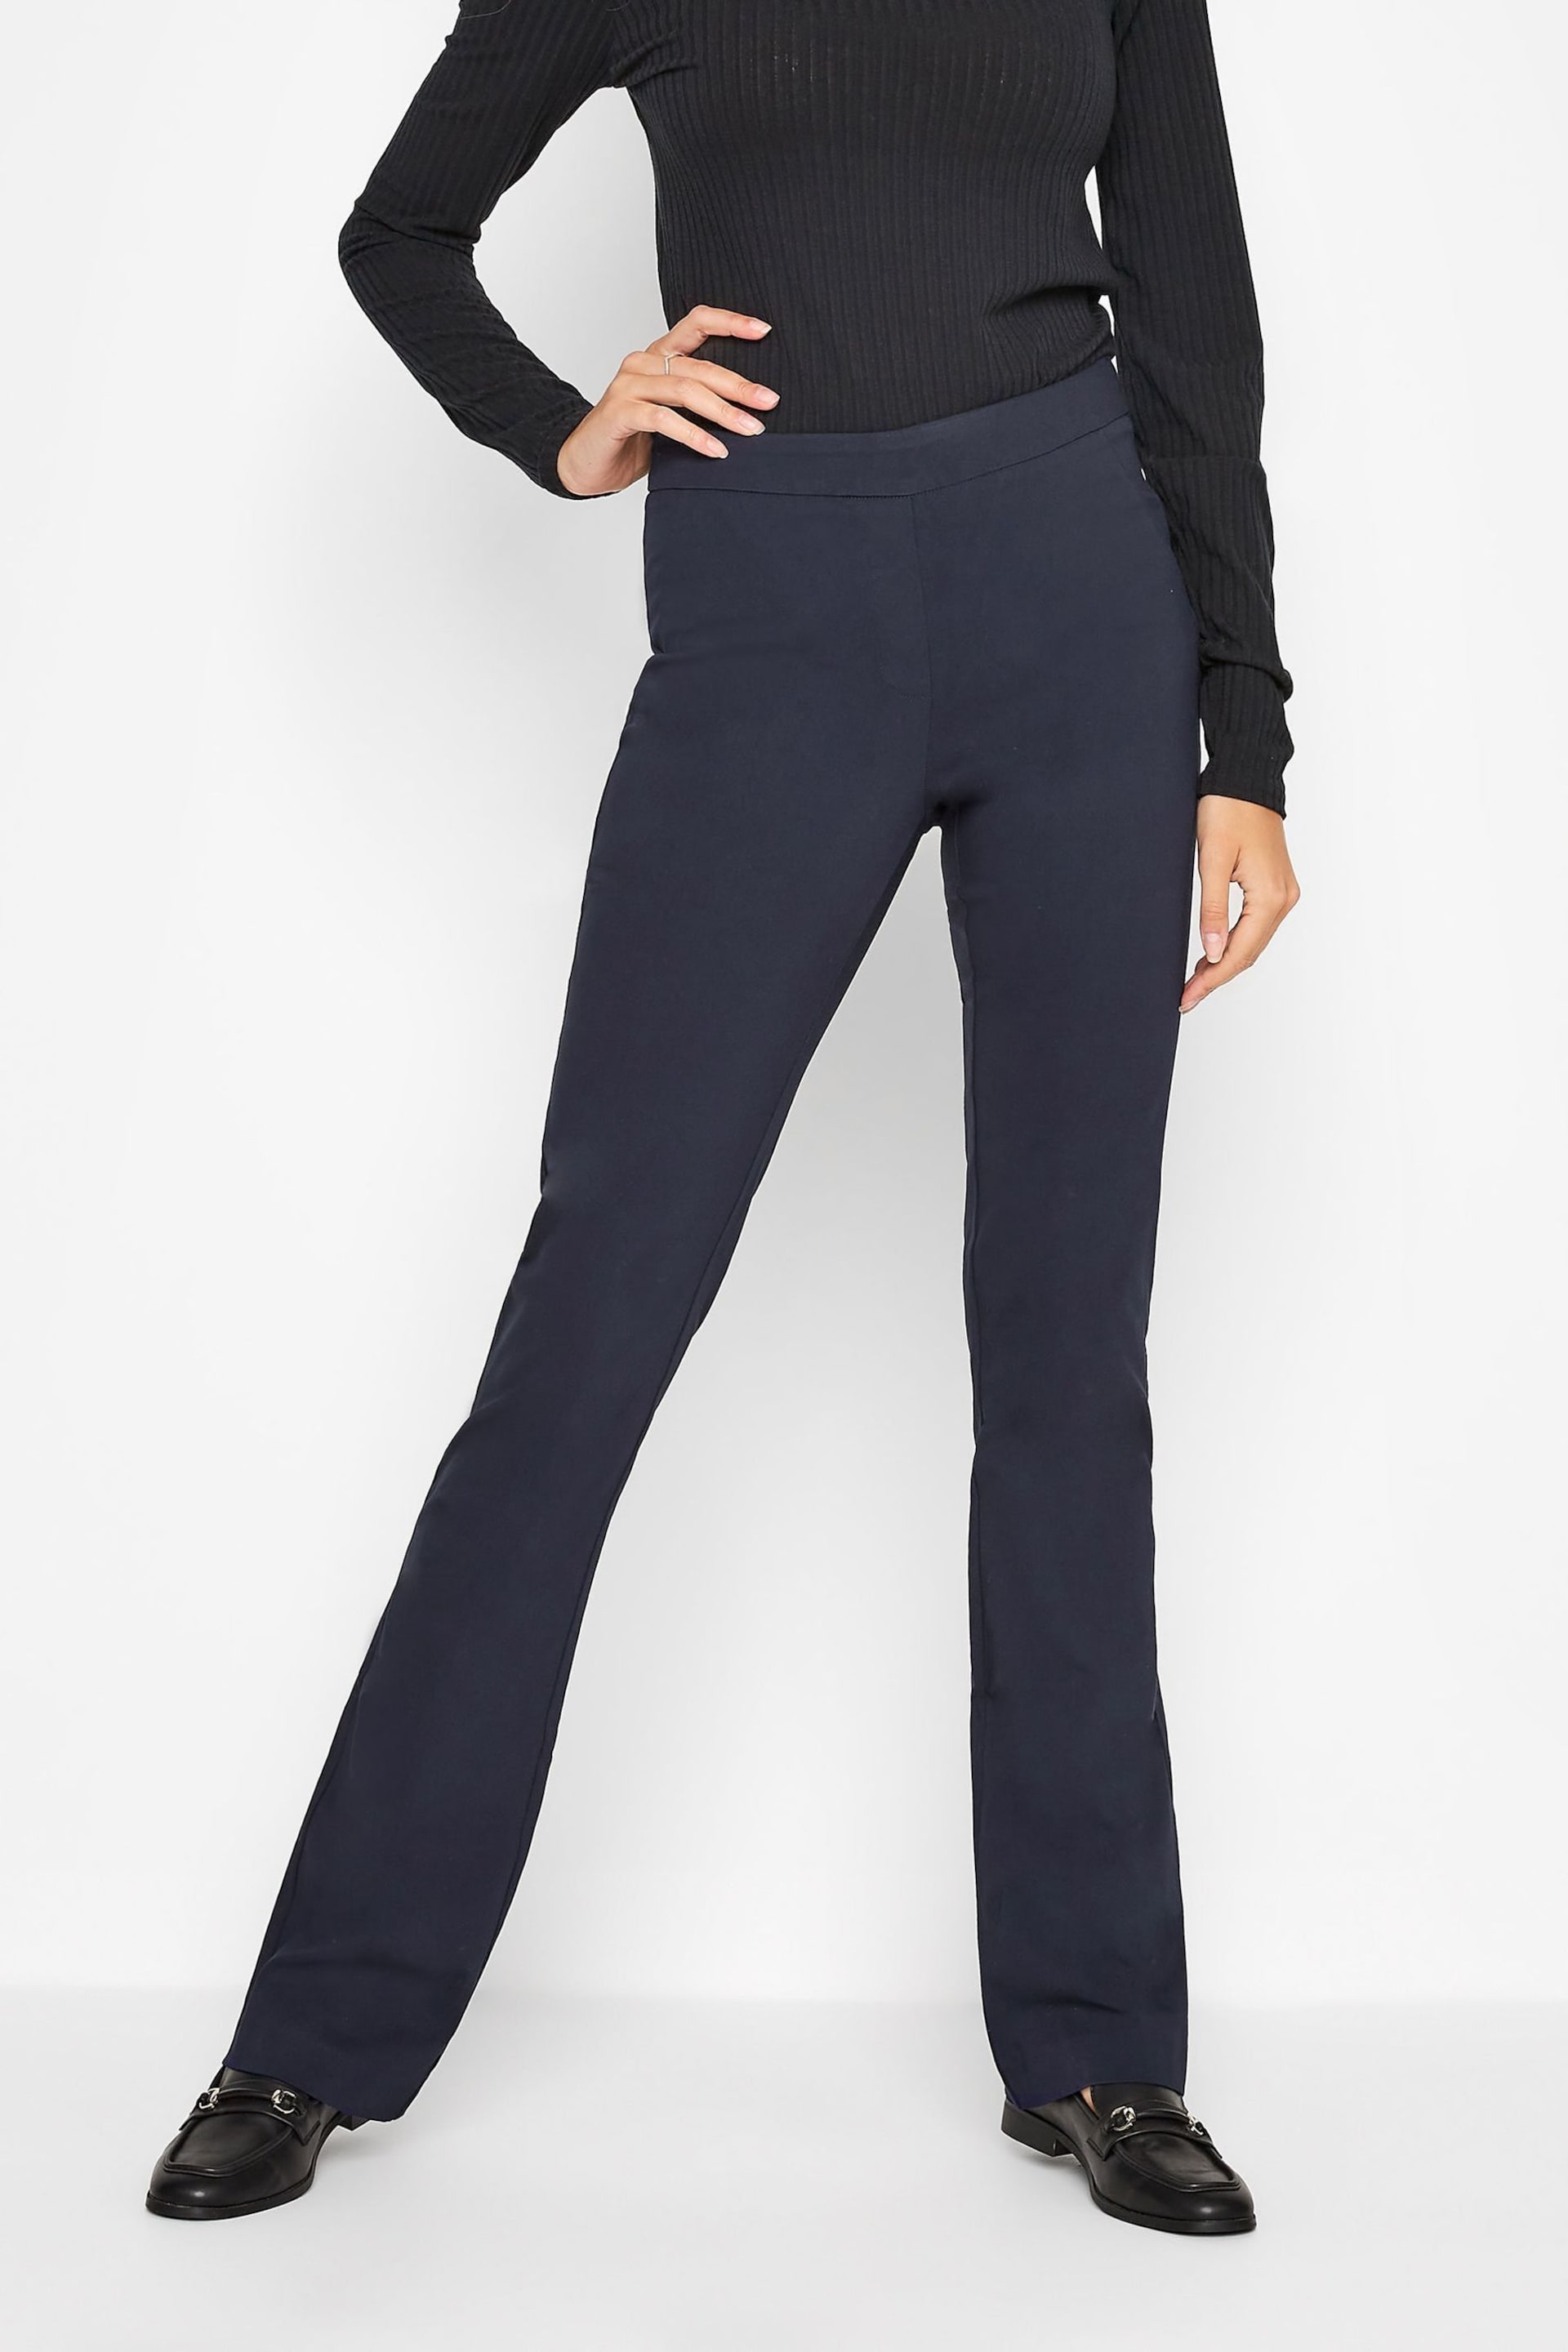 Long Tall Sally Blue Bi-Stretch Bootcut Trousers - Image 1 of 3